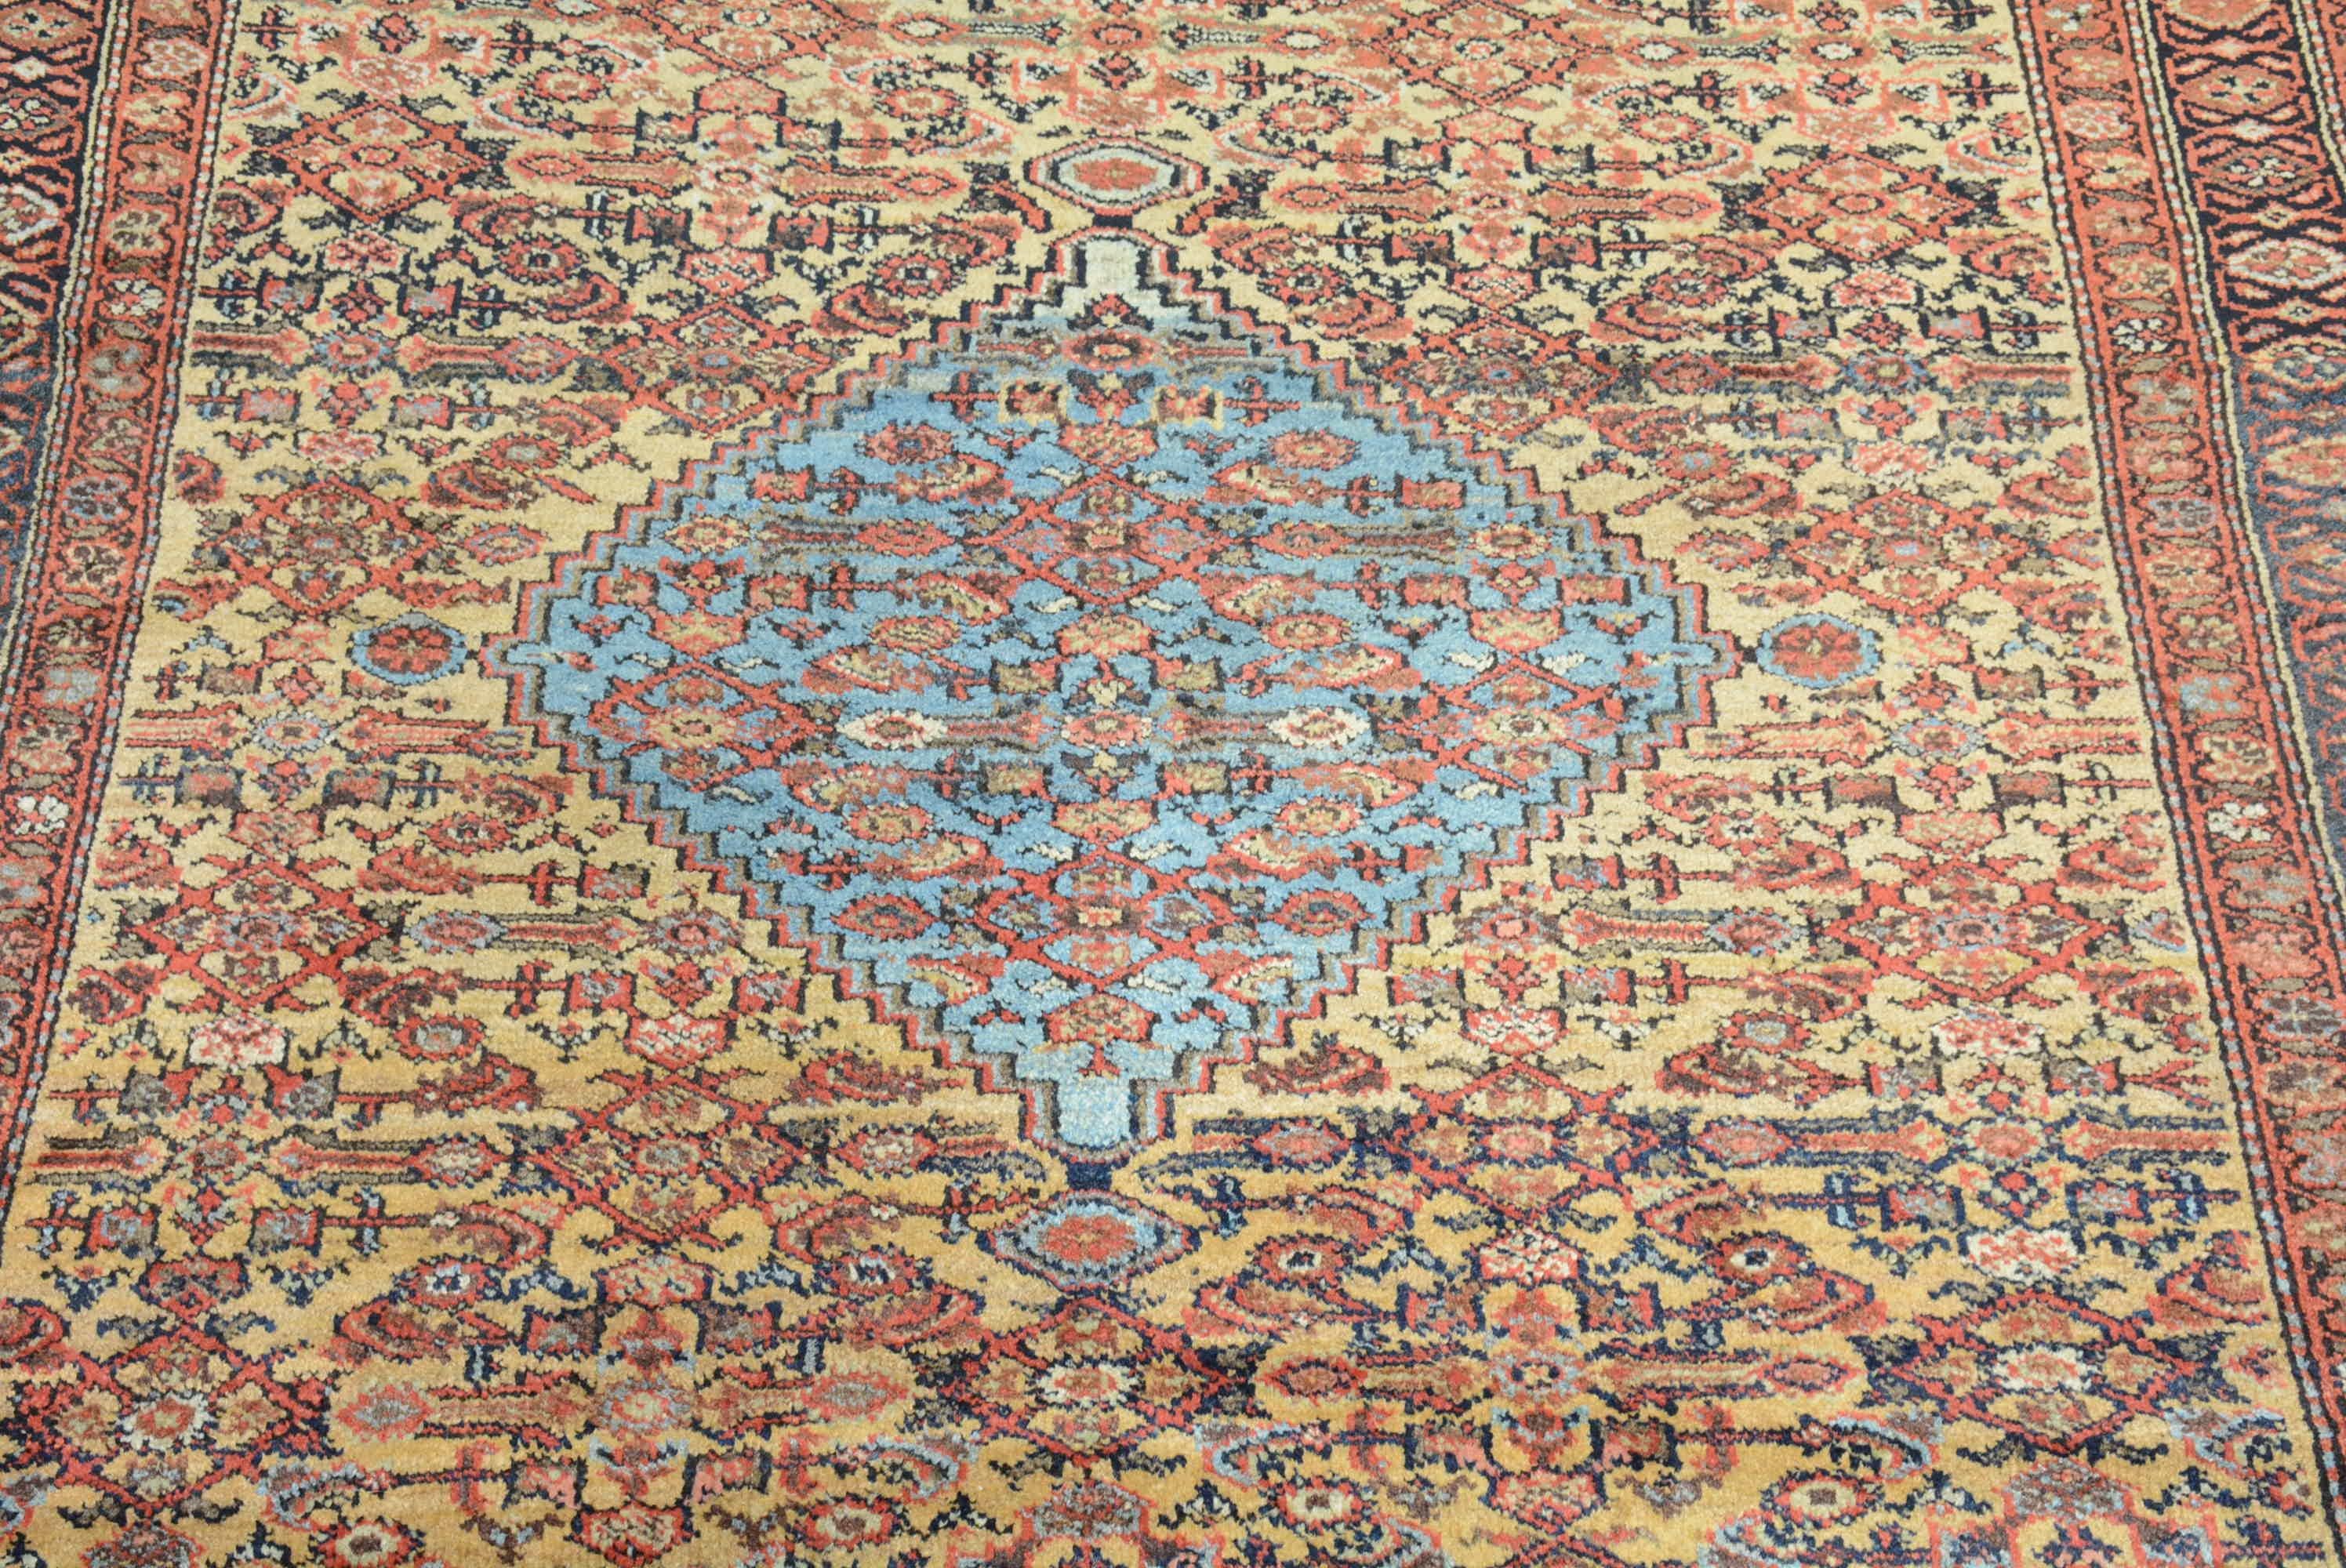 Rugs from the Fereghan district in northern Persia carefully blend geometric influences from neighboring western tribes with a more refined curvilinear aesthetic as seen in this example.